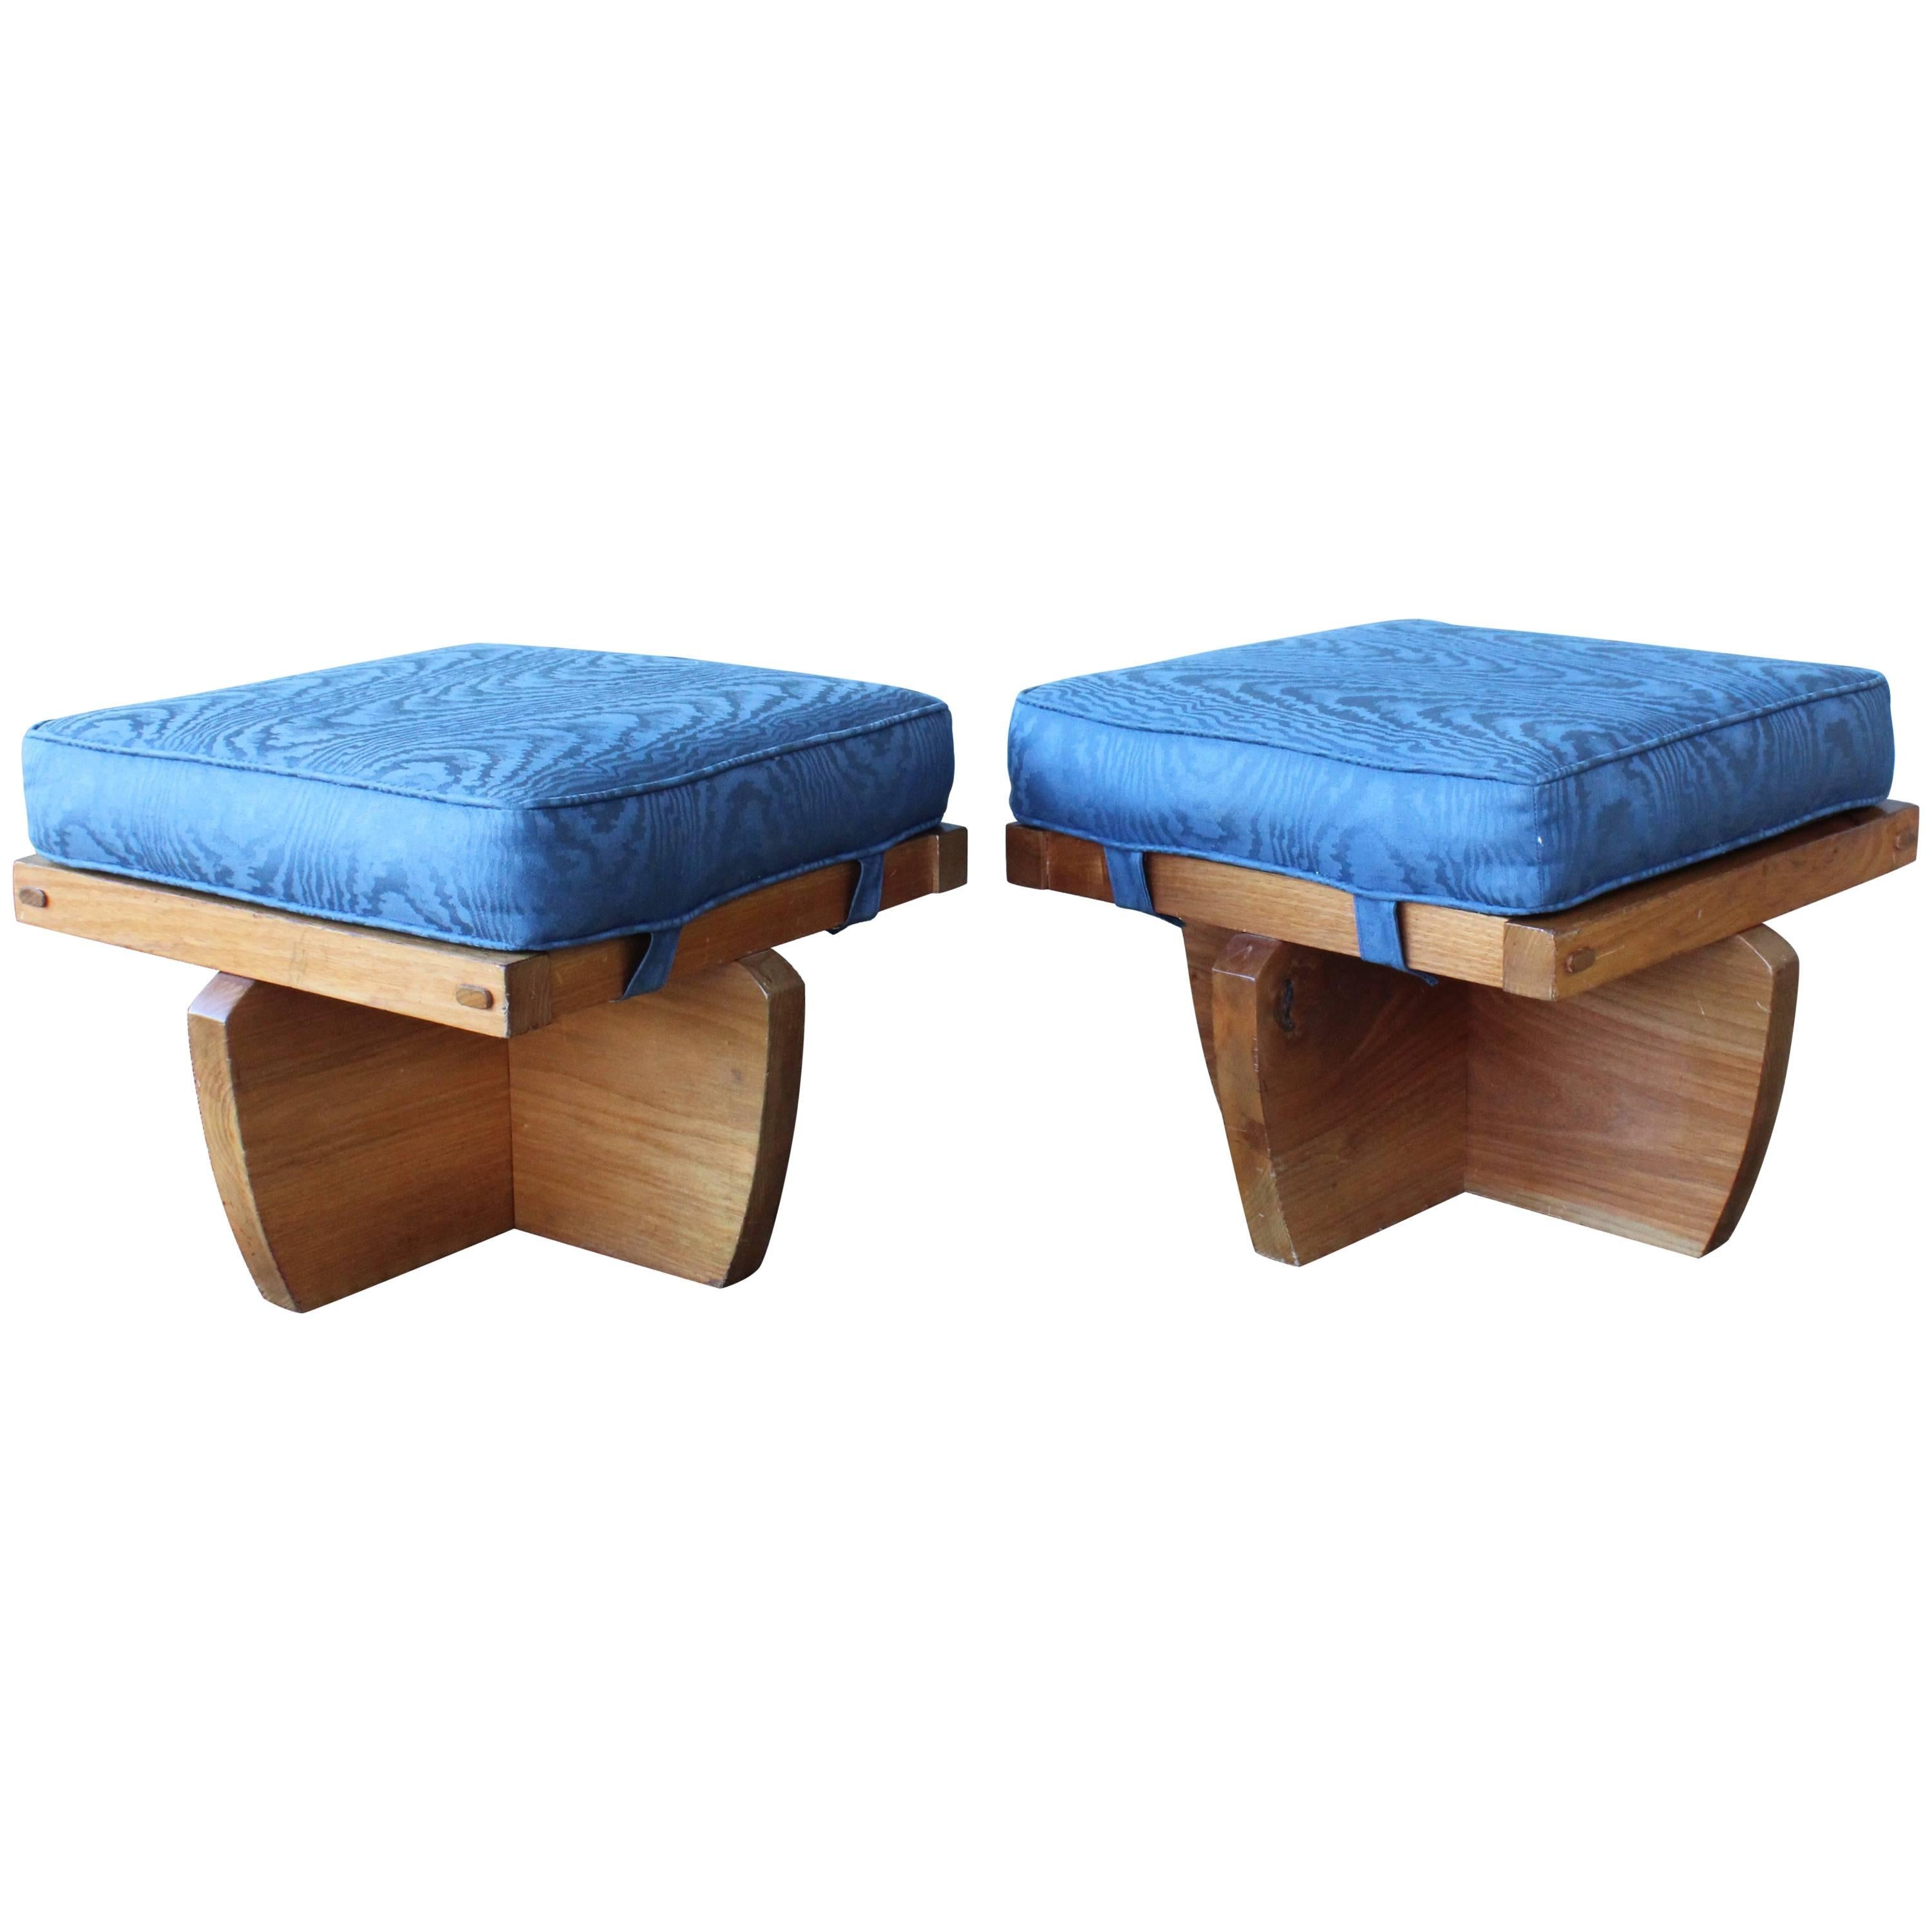 Pair of Stools in the Manner of George Nakashima